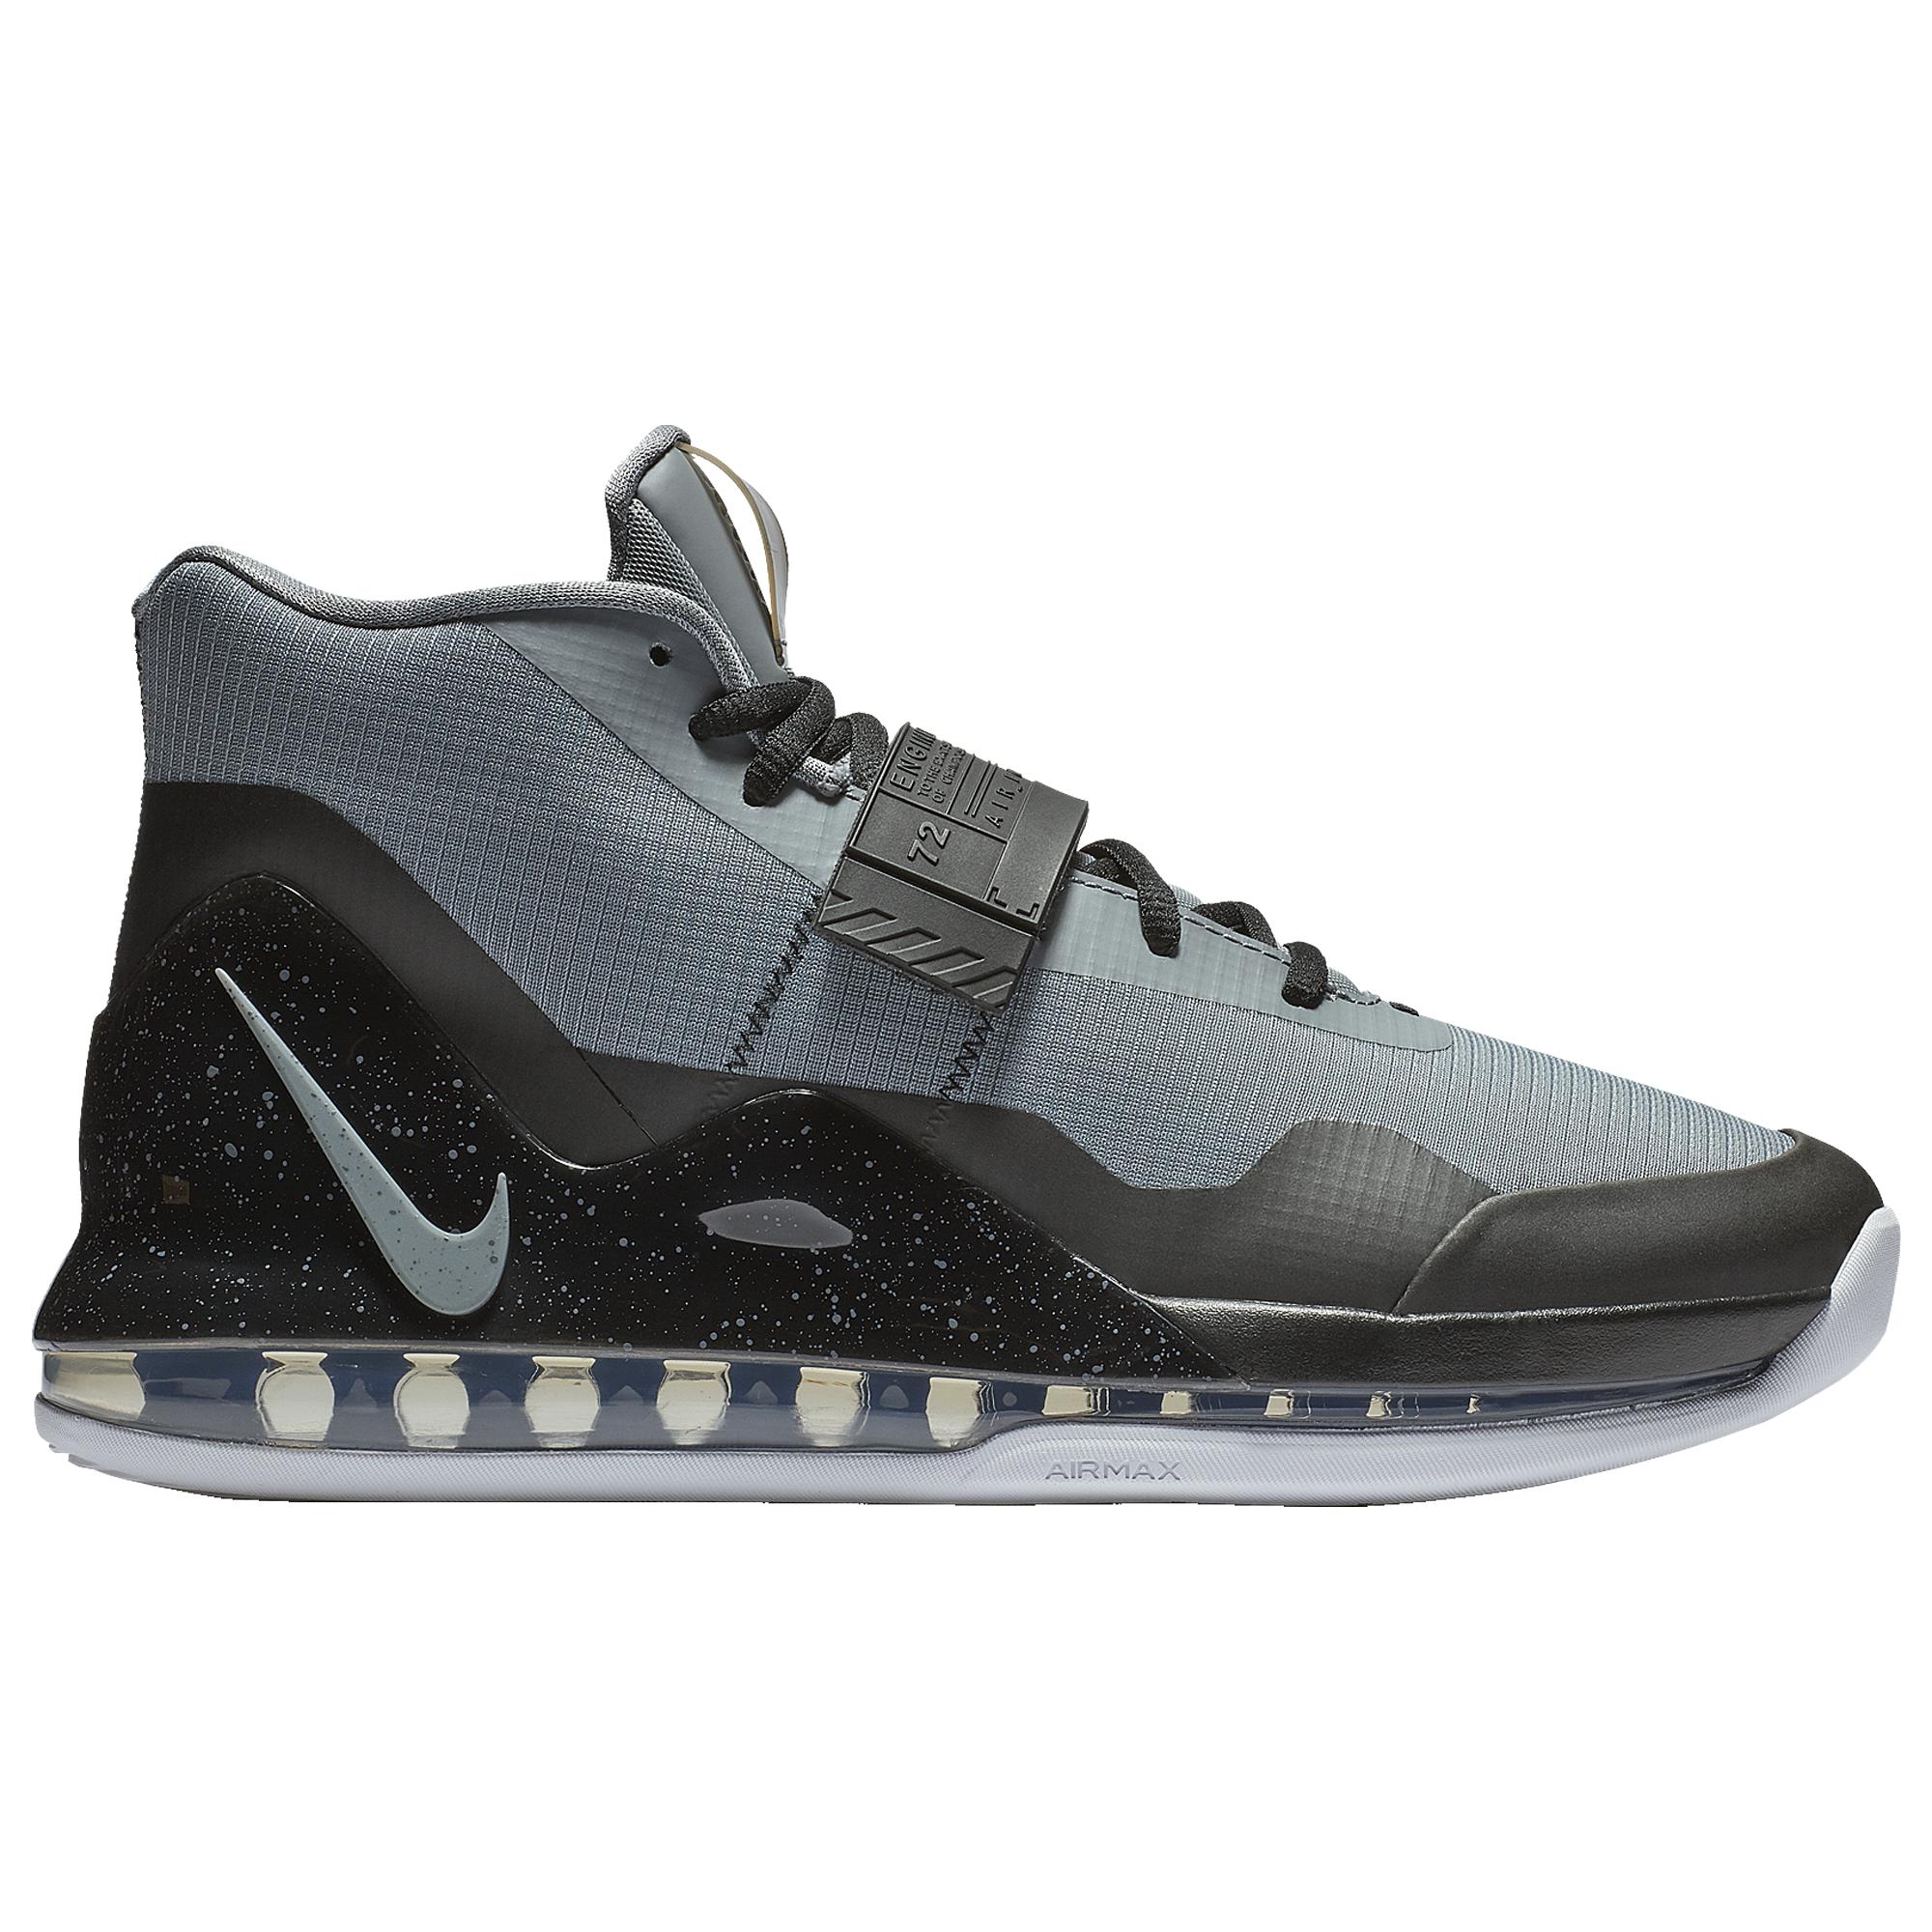 Nike Air Force Max Basketball Shoes in Cool Grey/Black/White ...